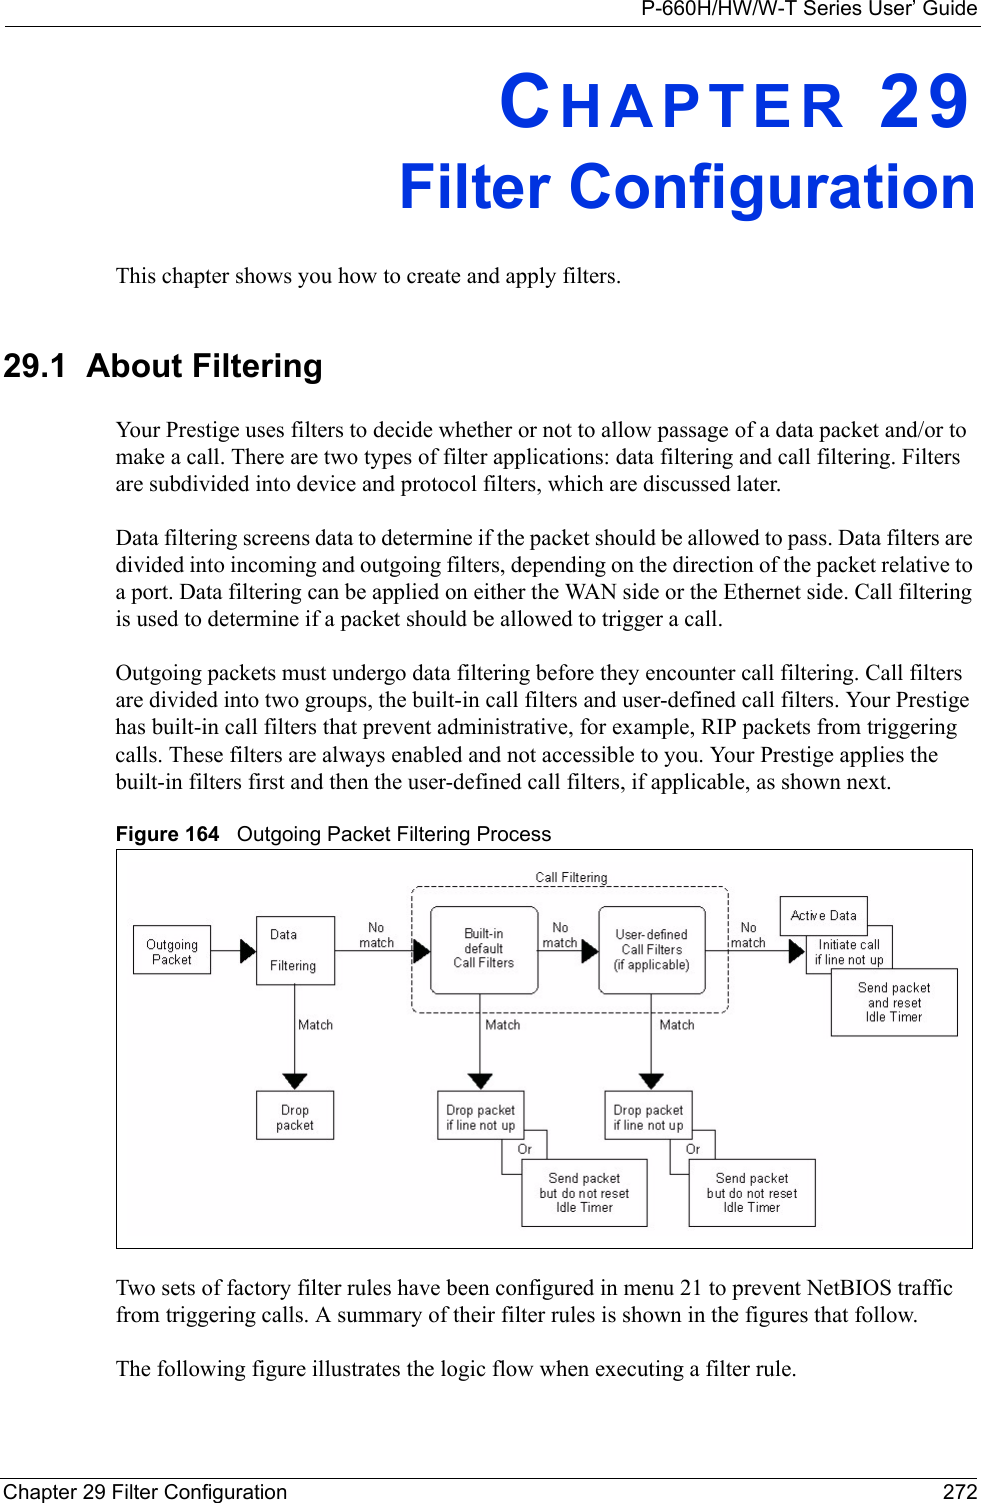 P-660H/HW/W-T Series User’ GuideChapter 29 Filter Configuration 272CHAPTER 29Filter ConfigurationThis chapter shows you how to create and apply filters.29.1  About FilteringYour Prestige uses filters to decide whether or not to allow passage of a data packet and/or to make a call. There are two types of filter applications: data filtering and call filtering. Filters are subdivided into device and protocol filters, which are discussed later.Data filtering screens data to determine if the packet should be allowed to pass. Data filters are divided into incoming and outgoing filters, depending on the direction of the packet relative to a port. Data filtering can be applied on either the WAN side or the Ethernet side. Call filtering is used to determine if a packet should be allowed to trigger a call.Outgoing packets must undergo data filtering before they encounter call filtering. Call filters are divided into two groups, the built-in call filters and user-defined call filters. Your Prestige has built-in call filters that prevent administrative, for example, RIP packets from triggering calls. These filters are always enabled and not accessible to you. Your Prestige applies the built-in filters first and then the user-defined call filters, if applicable, as shown next.Figure 164   Outgoing Packet Filtering ProcessTwo sets of factory filter rules have been configured in menu 21 to prevent NetBIOS traffic from triggering calls. A summary of their filter rules is shown in the figures that follow.The following figure illustrates the logic flow when executing a filter rule.